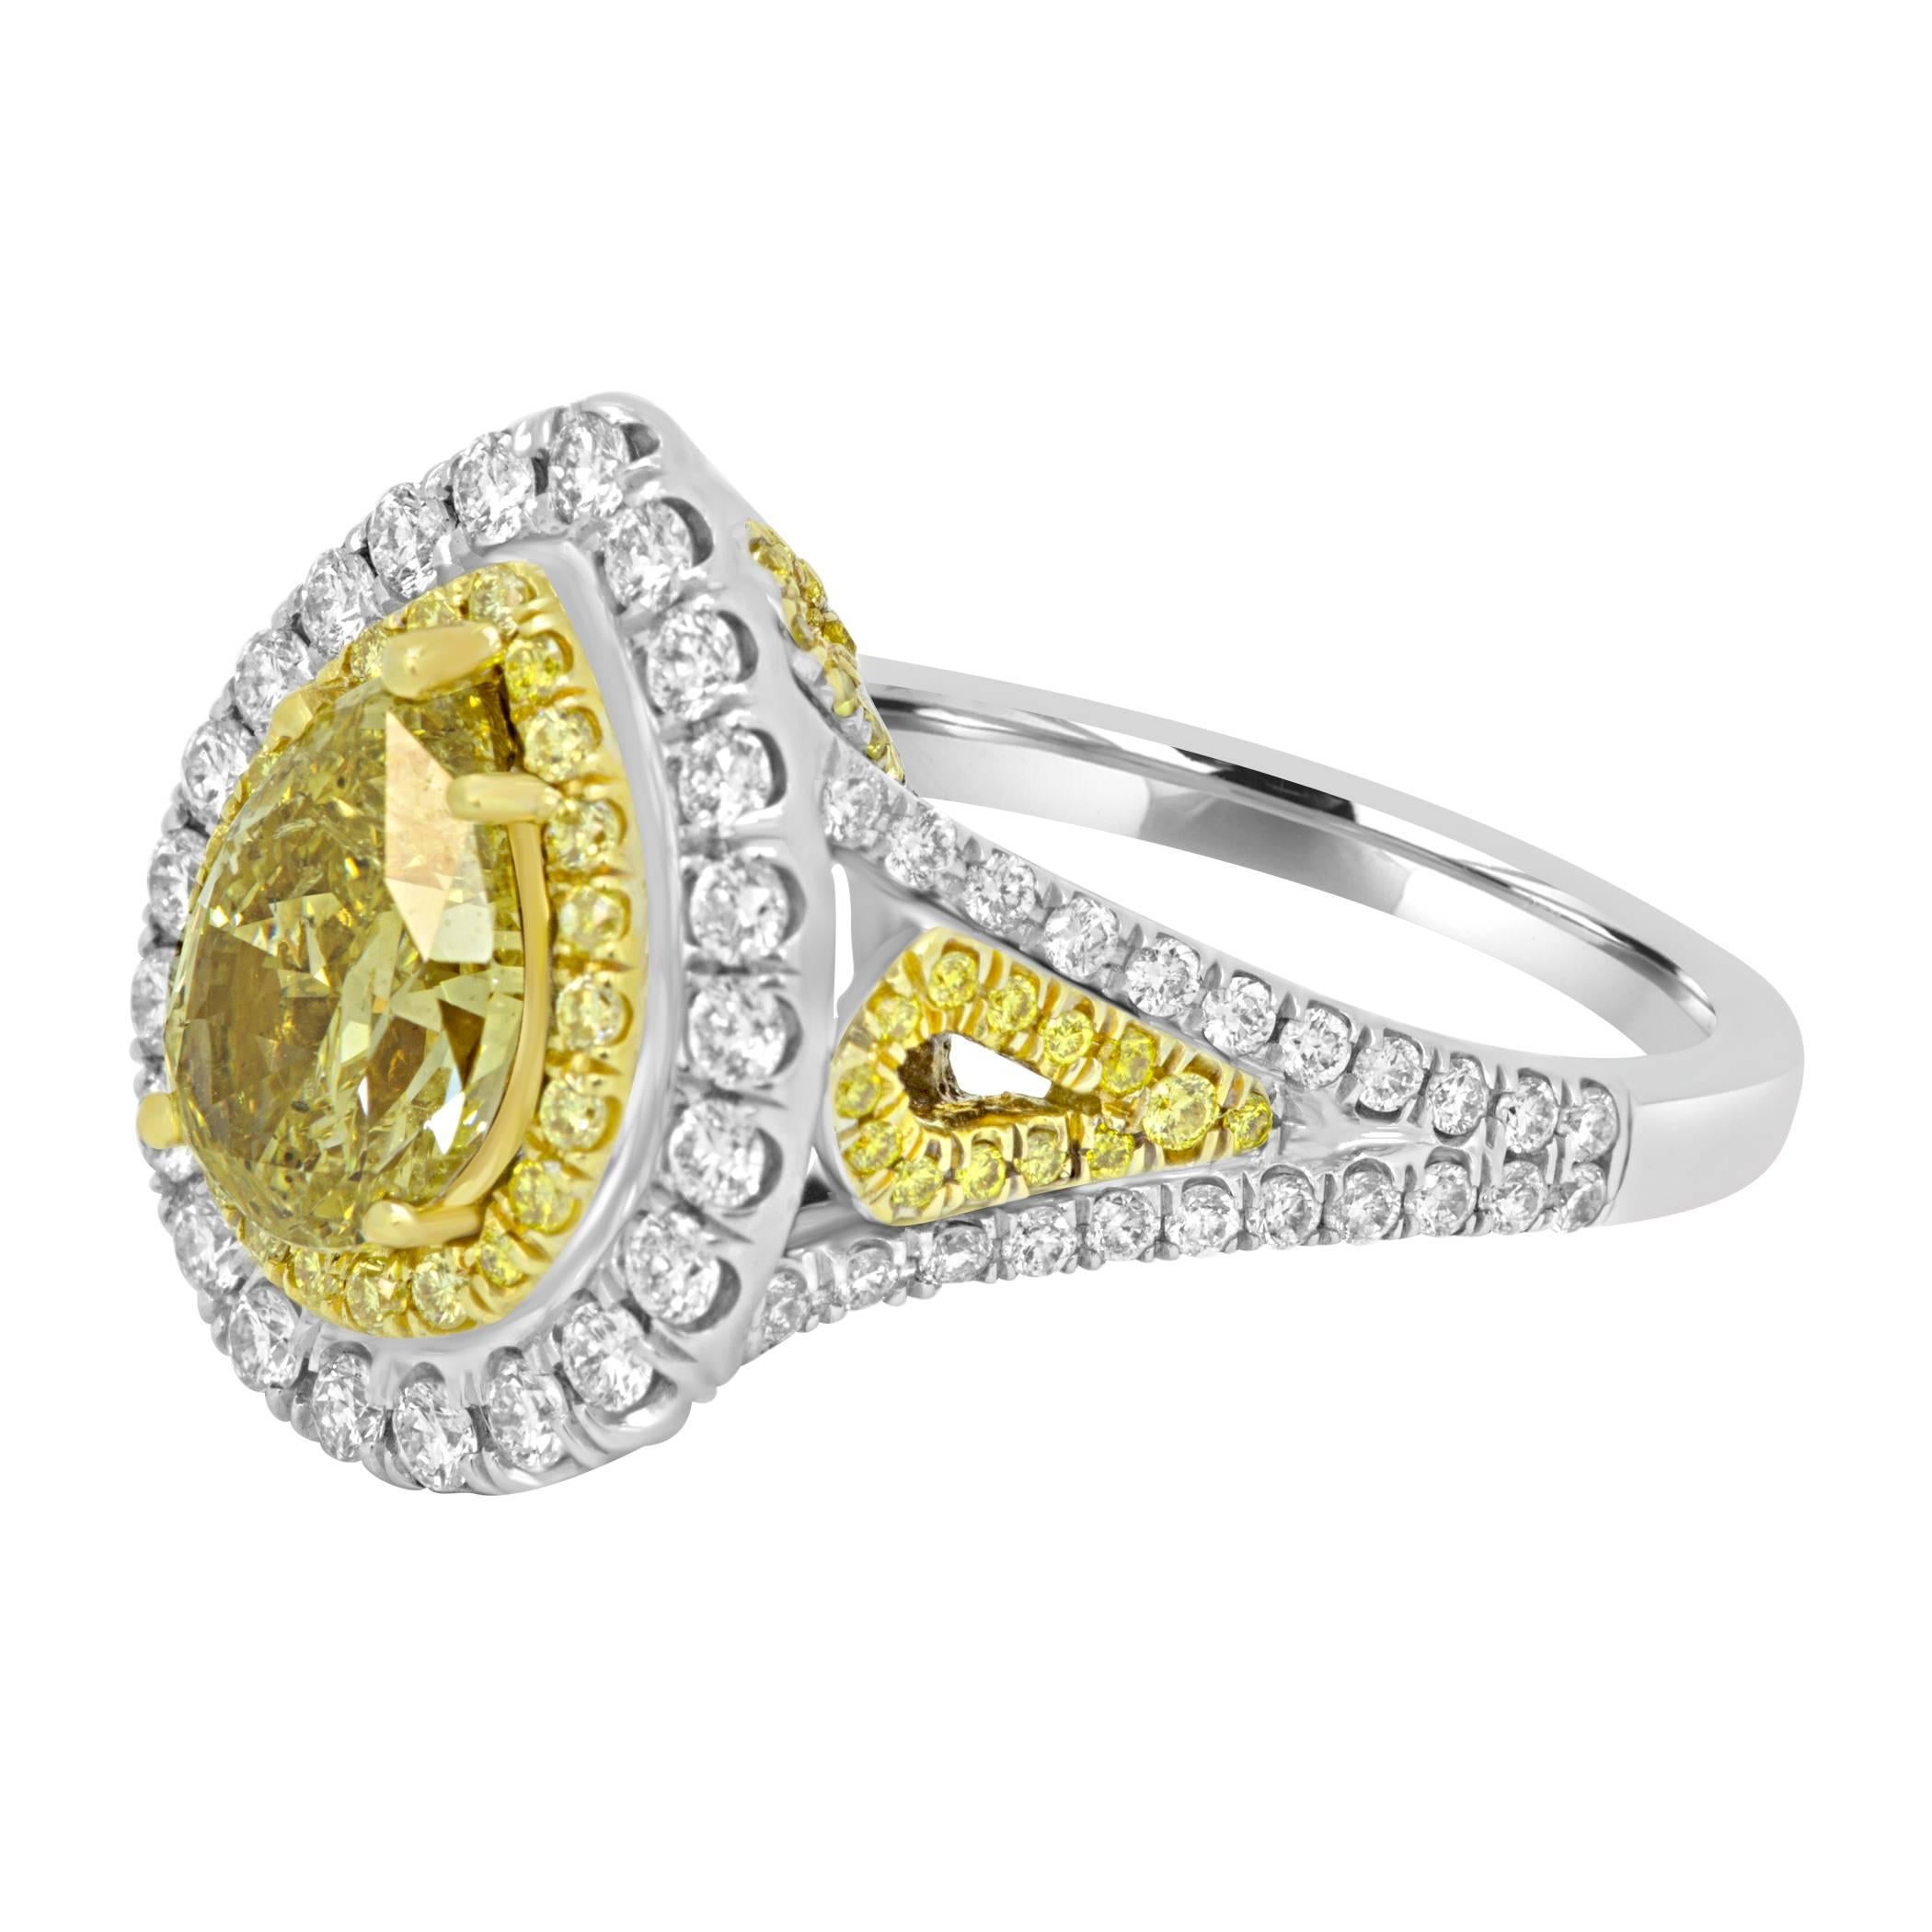 GIA Certified Natural Fancy Intense Yellow Pear shape Diamond  1.26 Carat Encircled in a Double Halo of of Natural Fancy Yellow Round Diamond 0.36 Carat and Natural White Diamond 0.59 Carat in a beautiful Handcrafted Two Color 18K White and Yellow